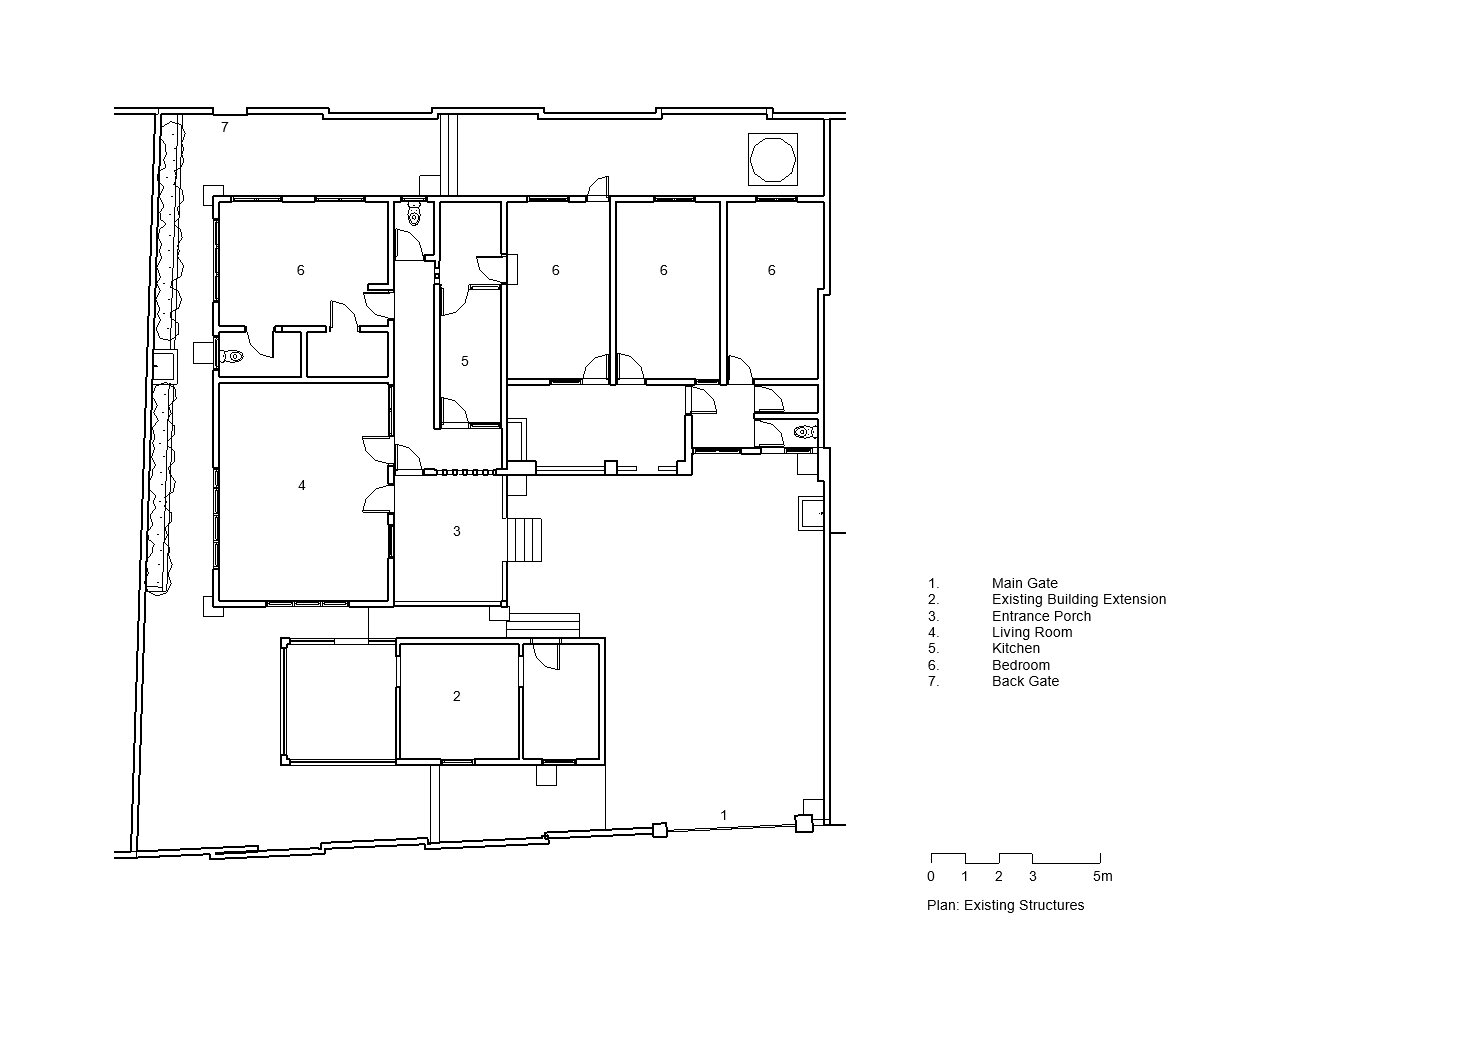 2020-07-15 - P - Sheet - A-CD-100 - Ground Floor Plan - Existing_cropped.jpg